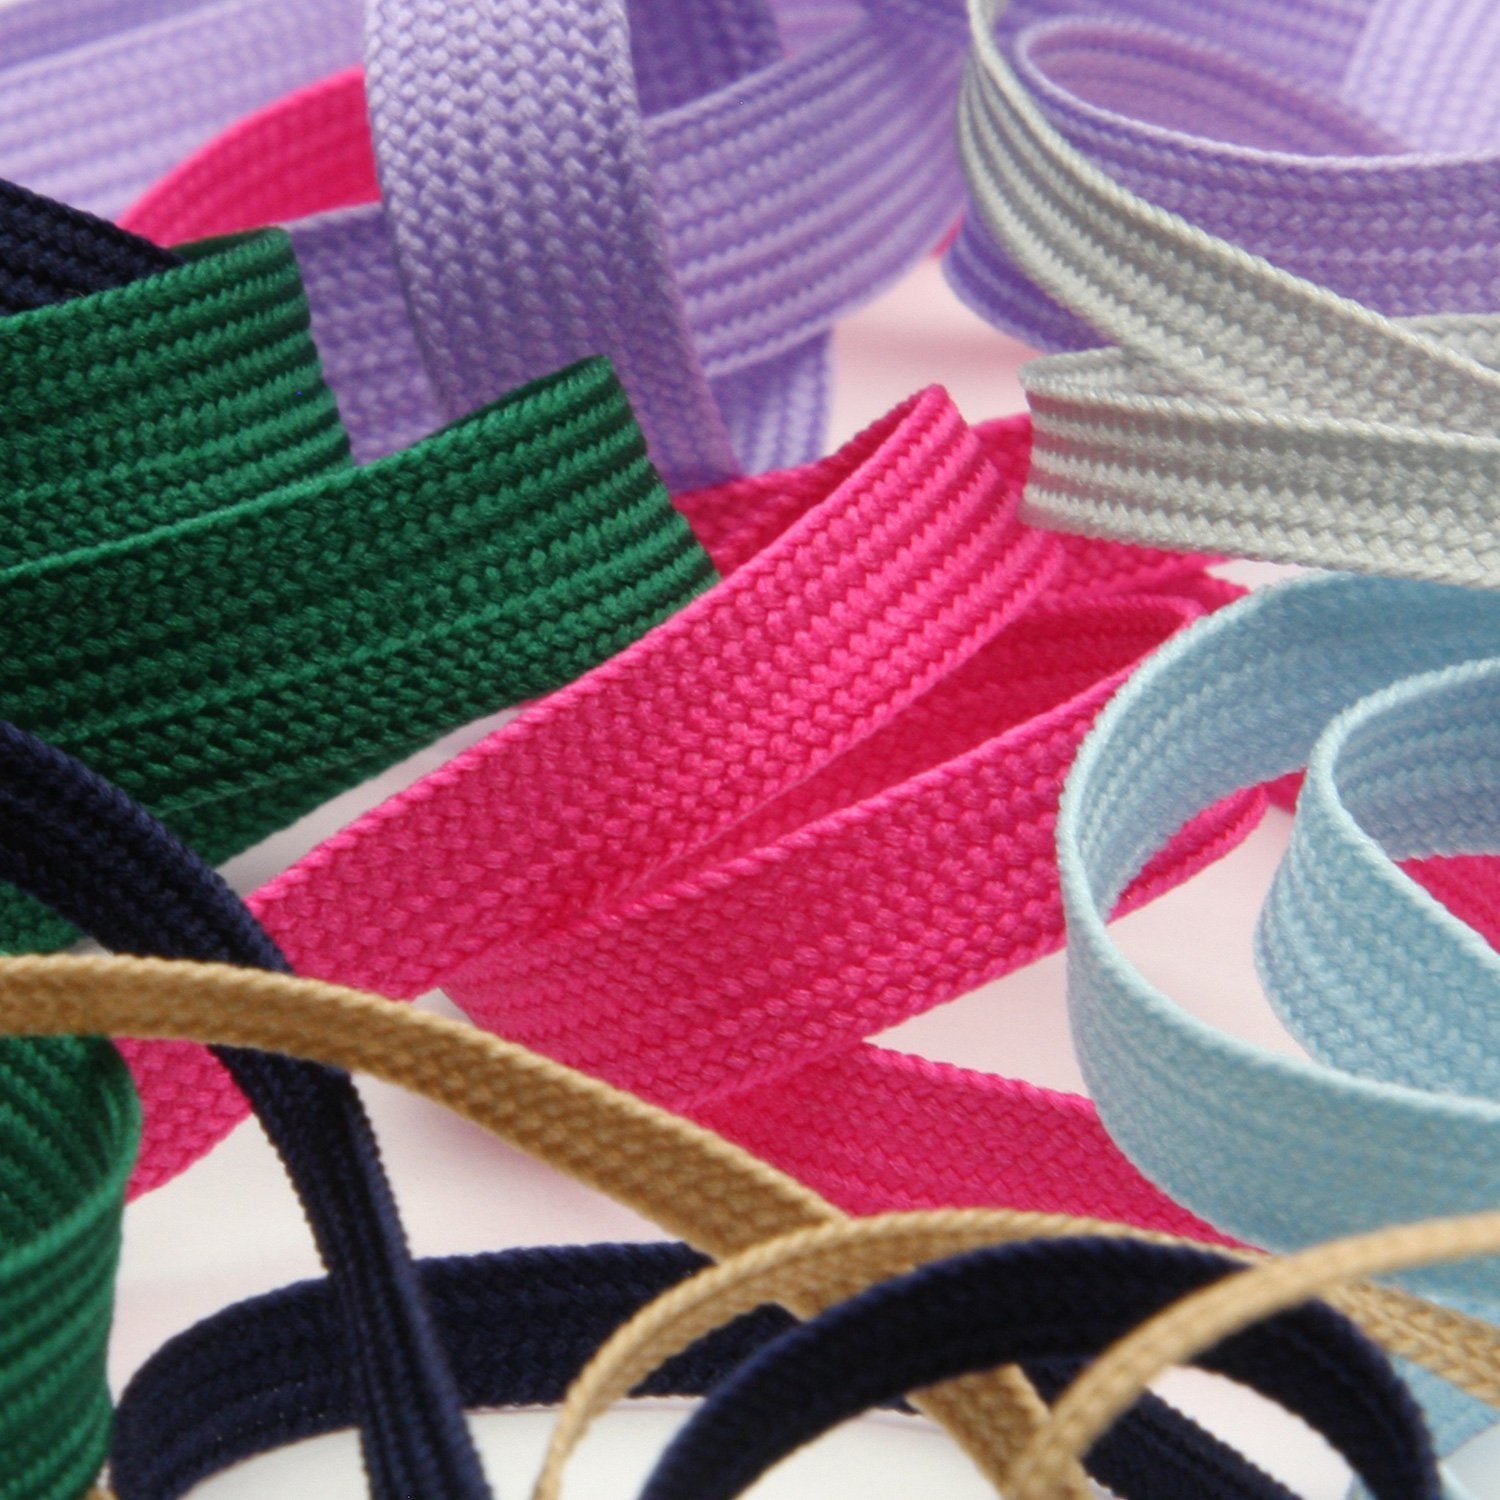 FUJIYAMA RIBBON [Wholesale] Polyester Trimming Braid approx.7mm 30 Meters Roll